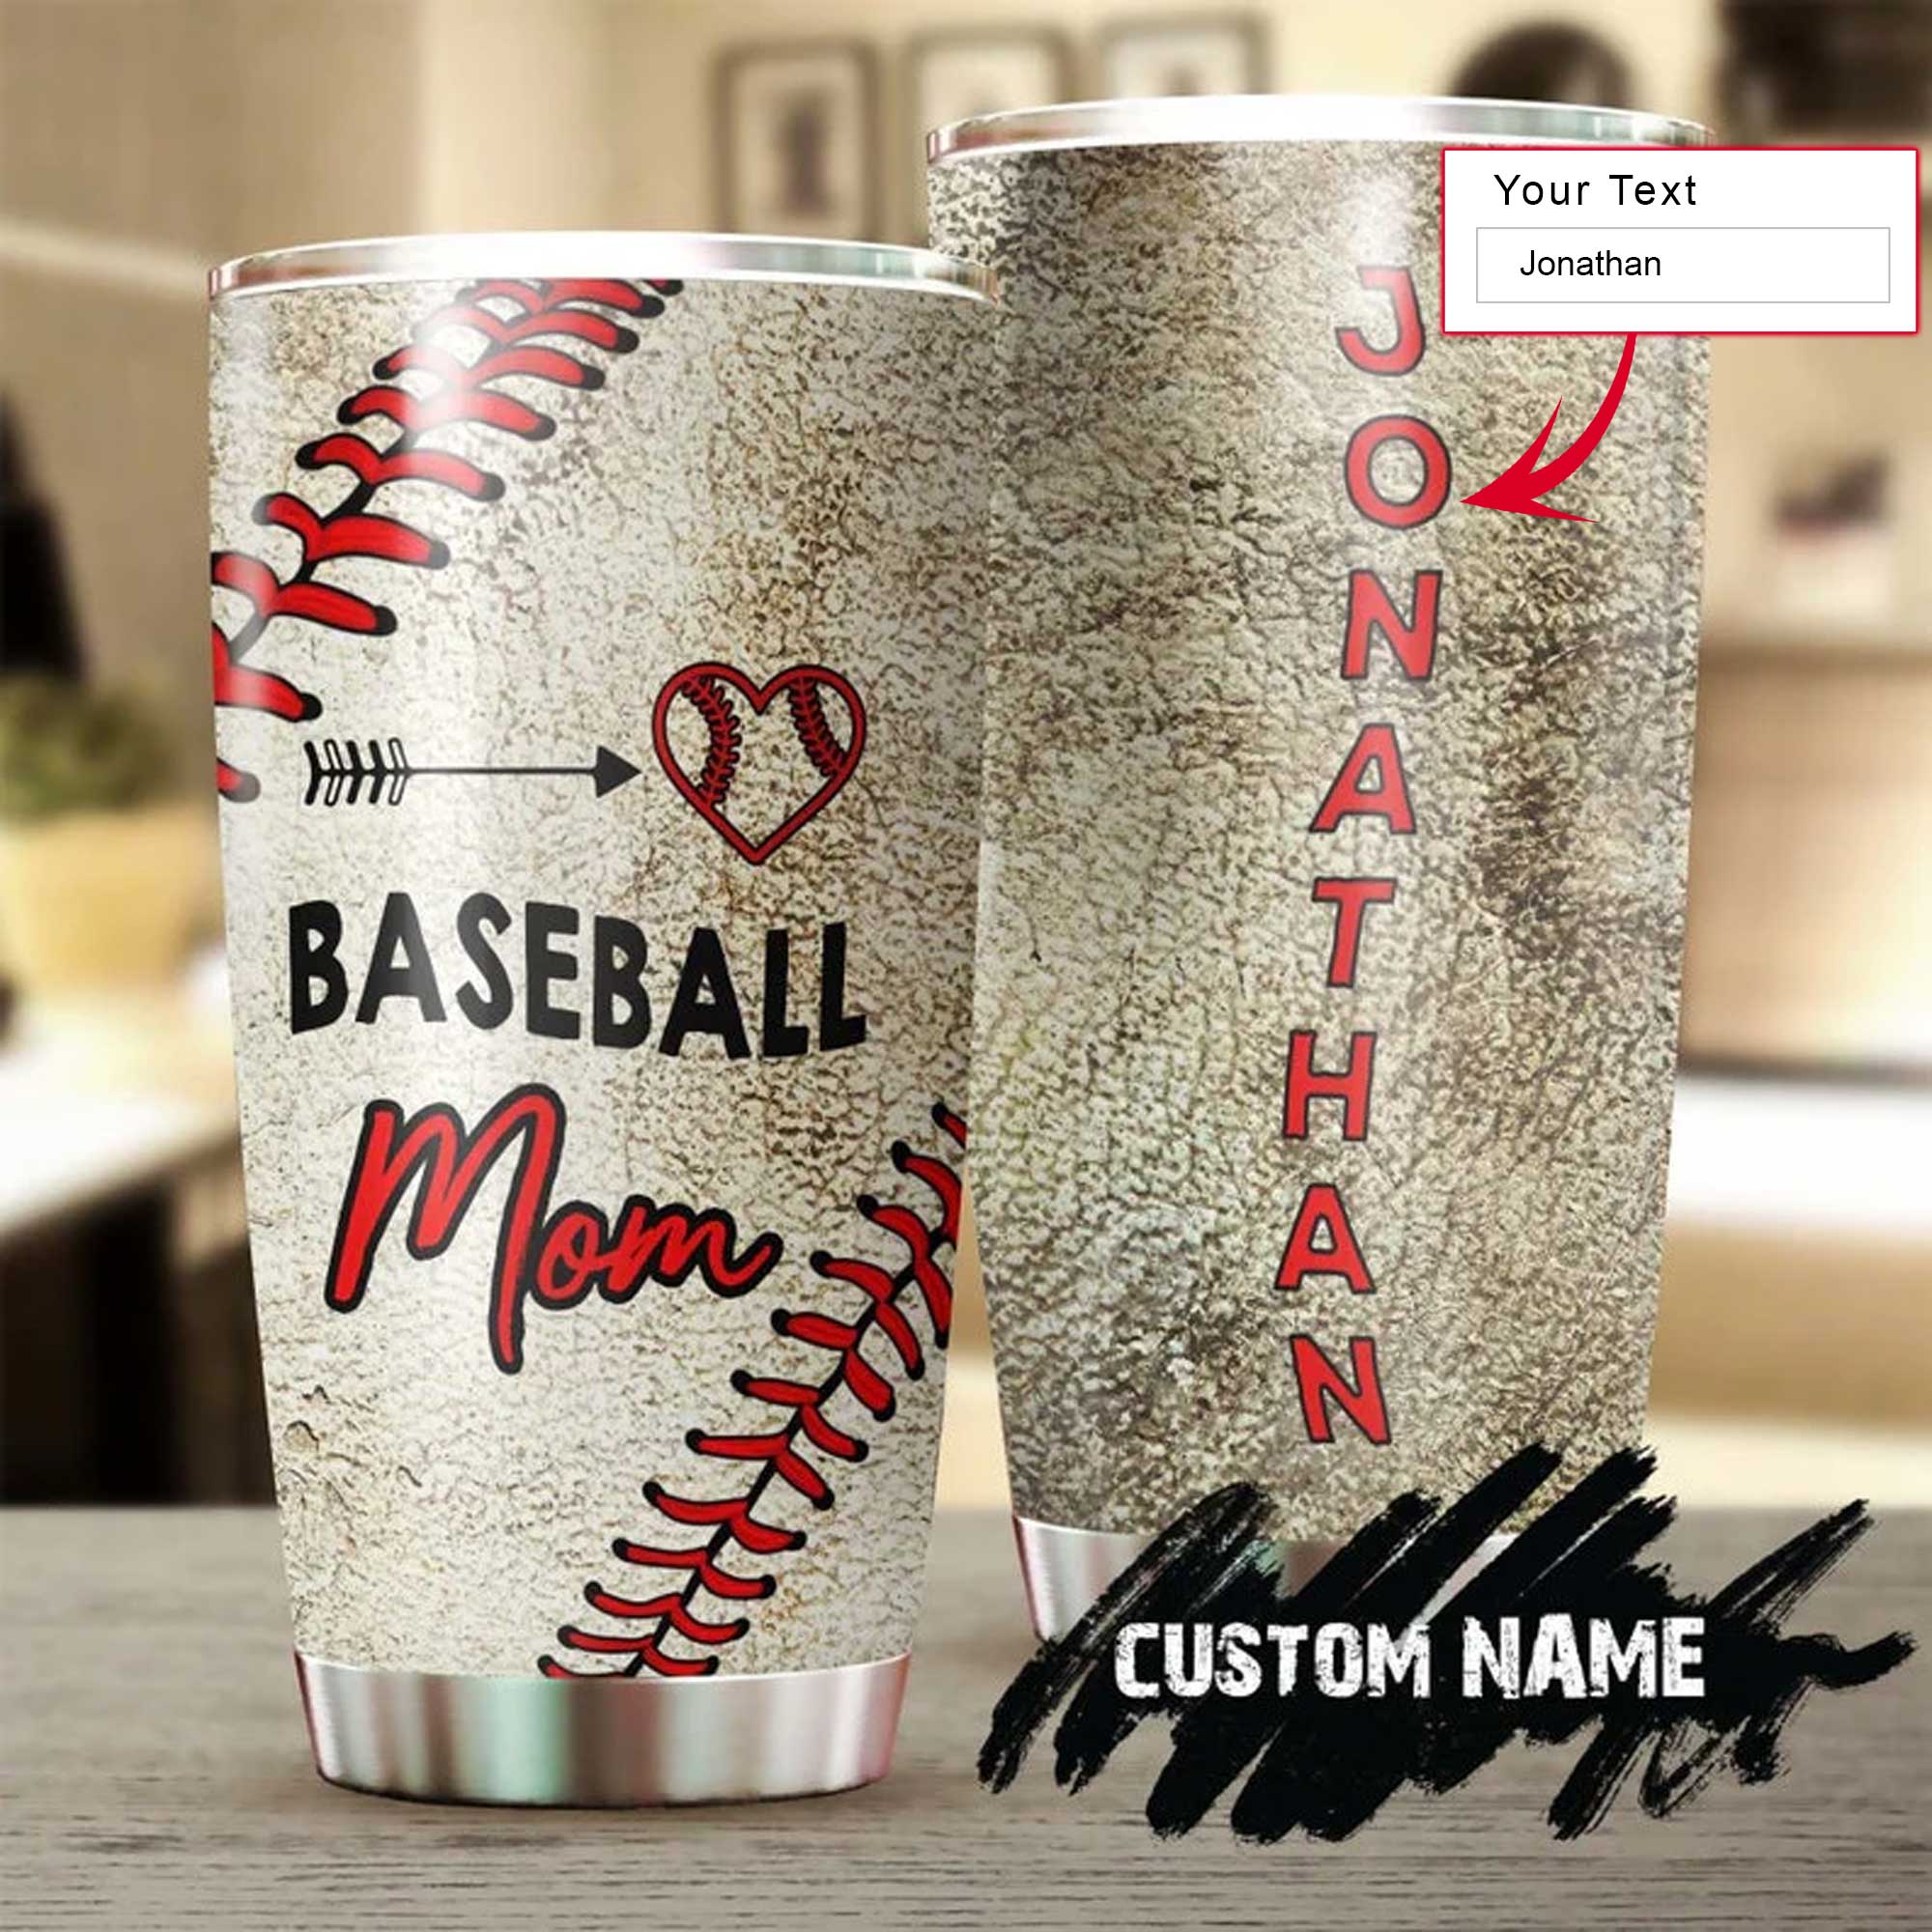 Personalized Mother's Day Gift Tumbler - Custom Gift For Mother's Day, Presents for Mom - Baseball Mom Heart Funny Cute Tumbler